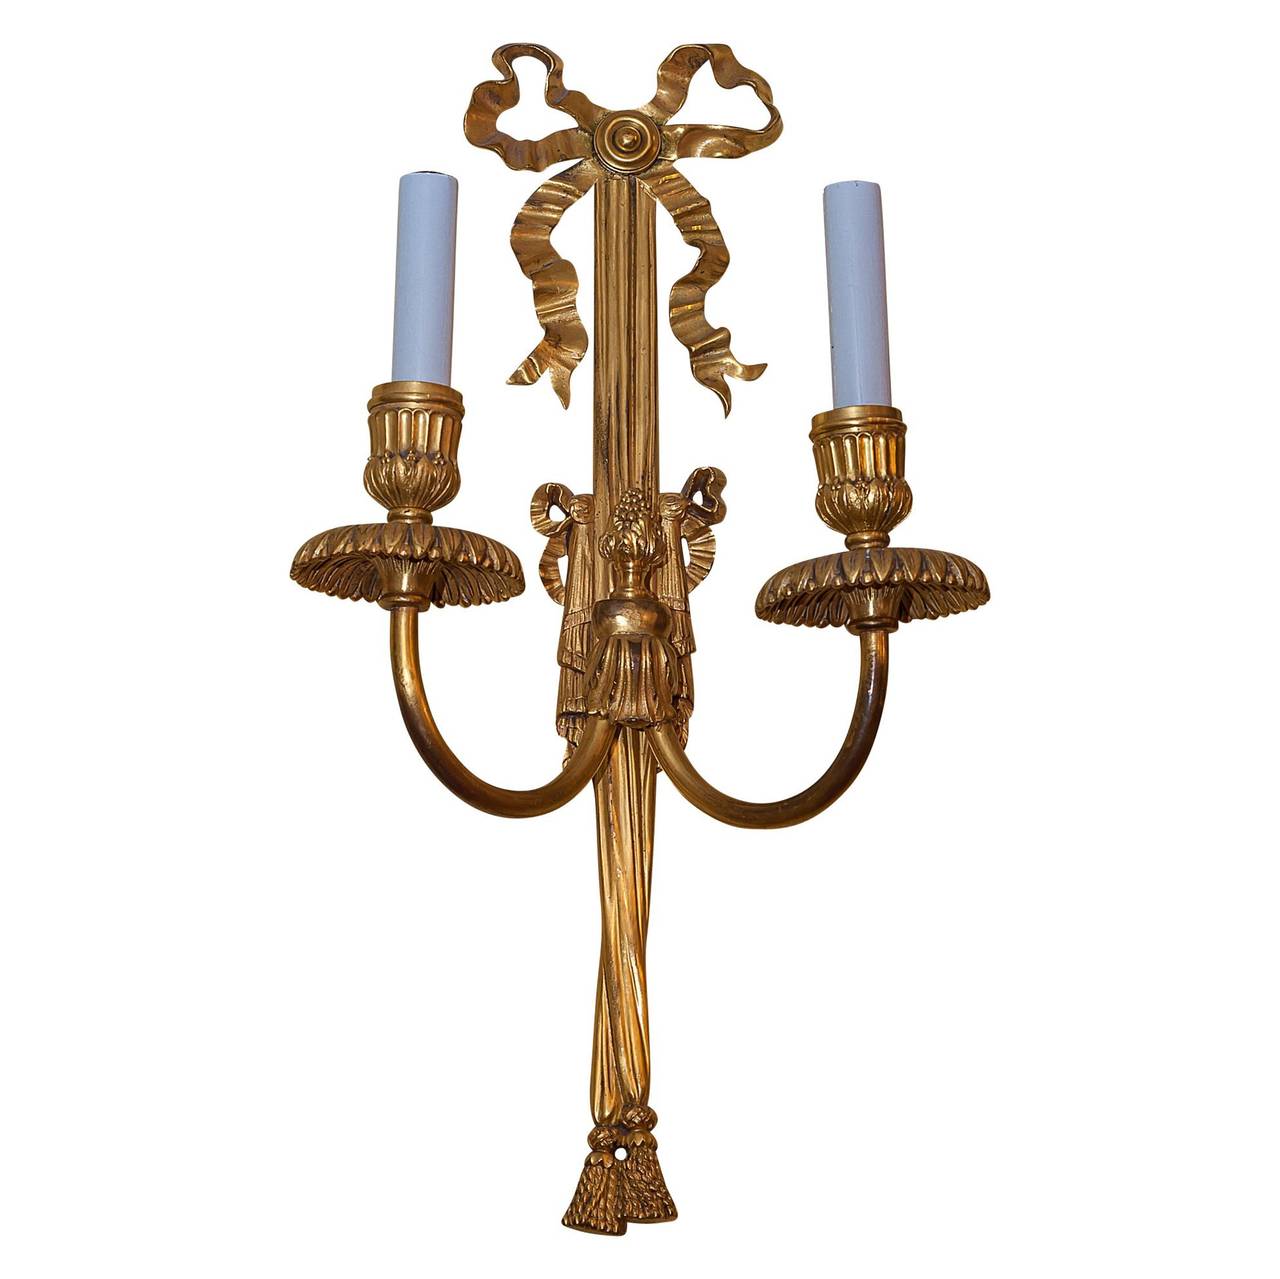 Pair of Gilt Bronze two-arm Wall Light Sconces Attributed to Caldwell & Co.
Stock Number: L216